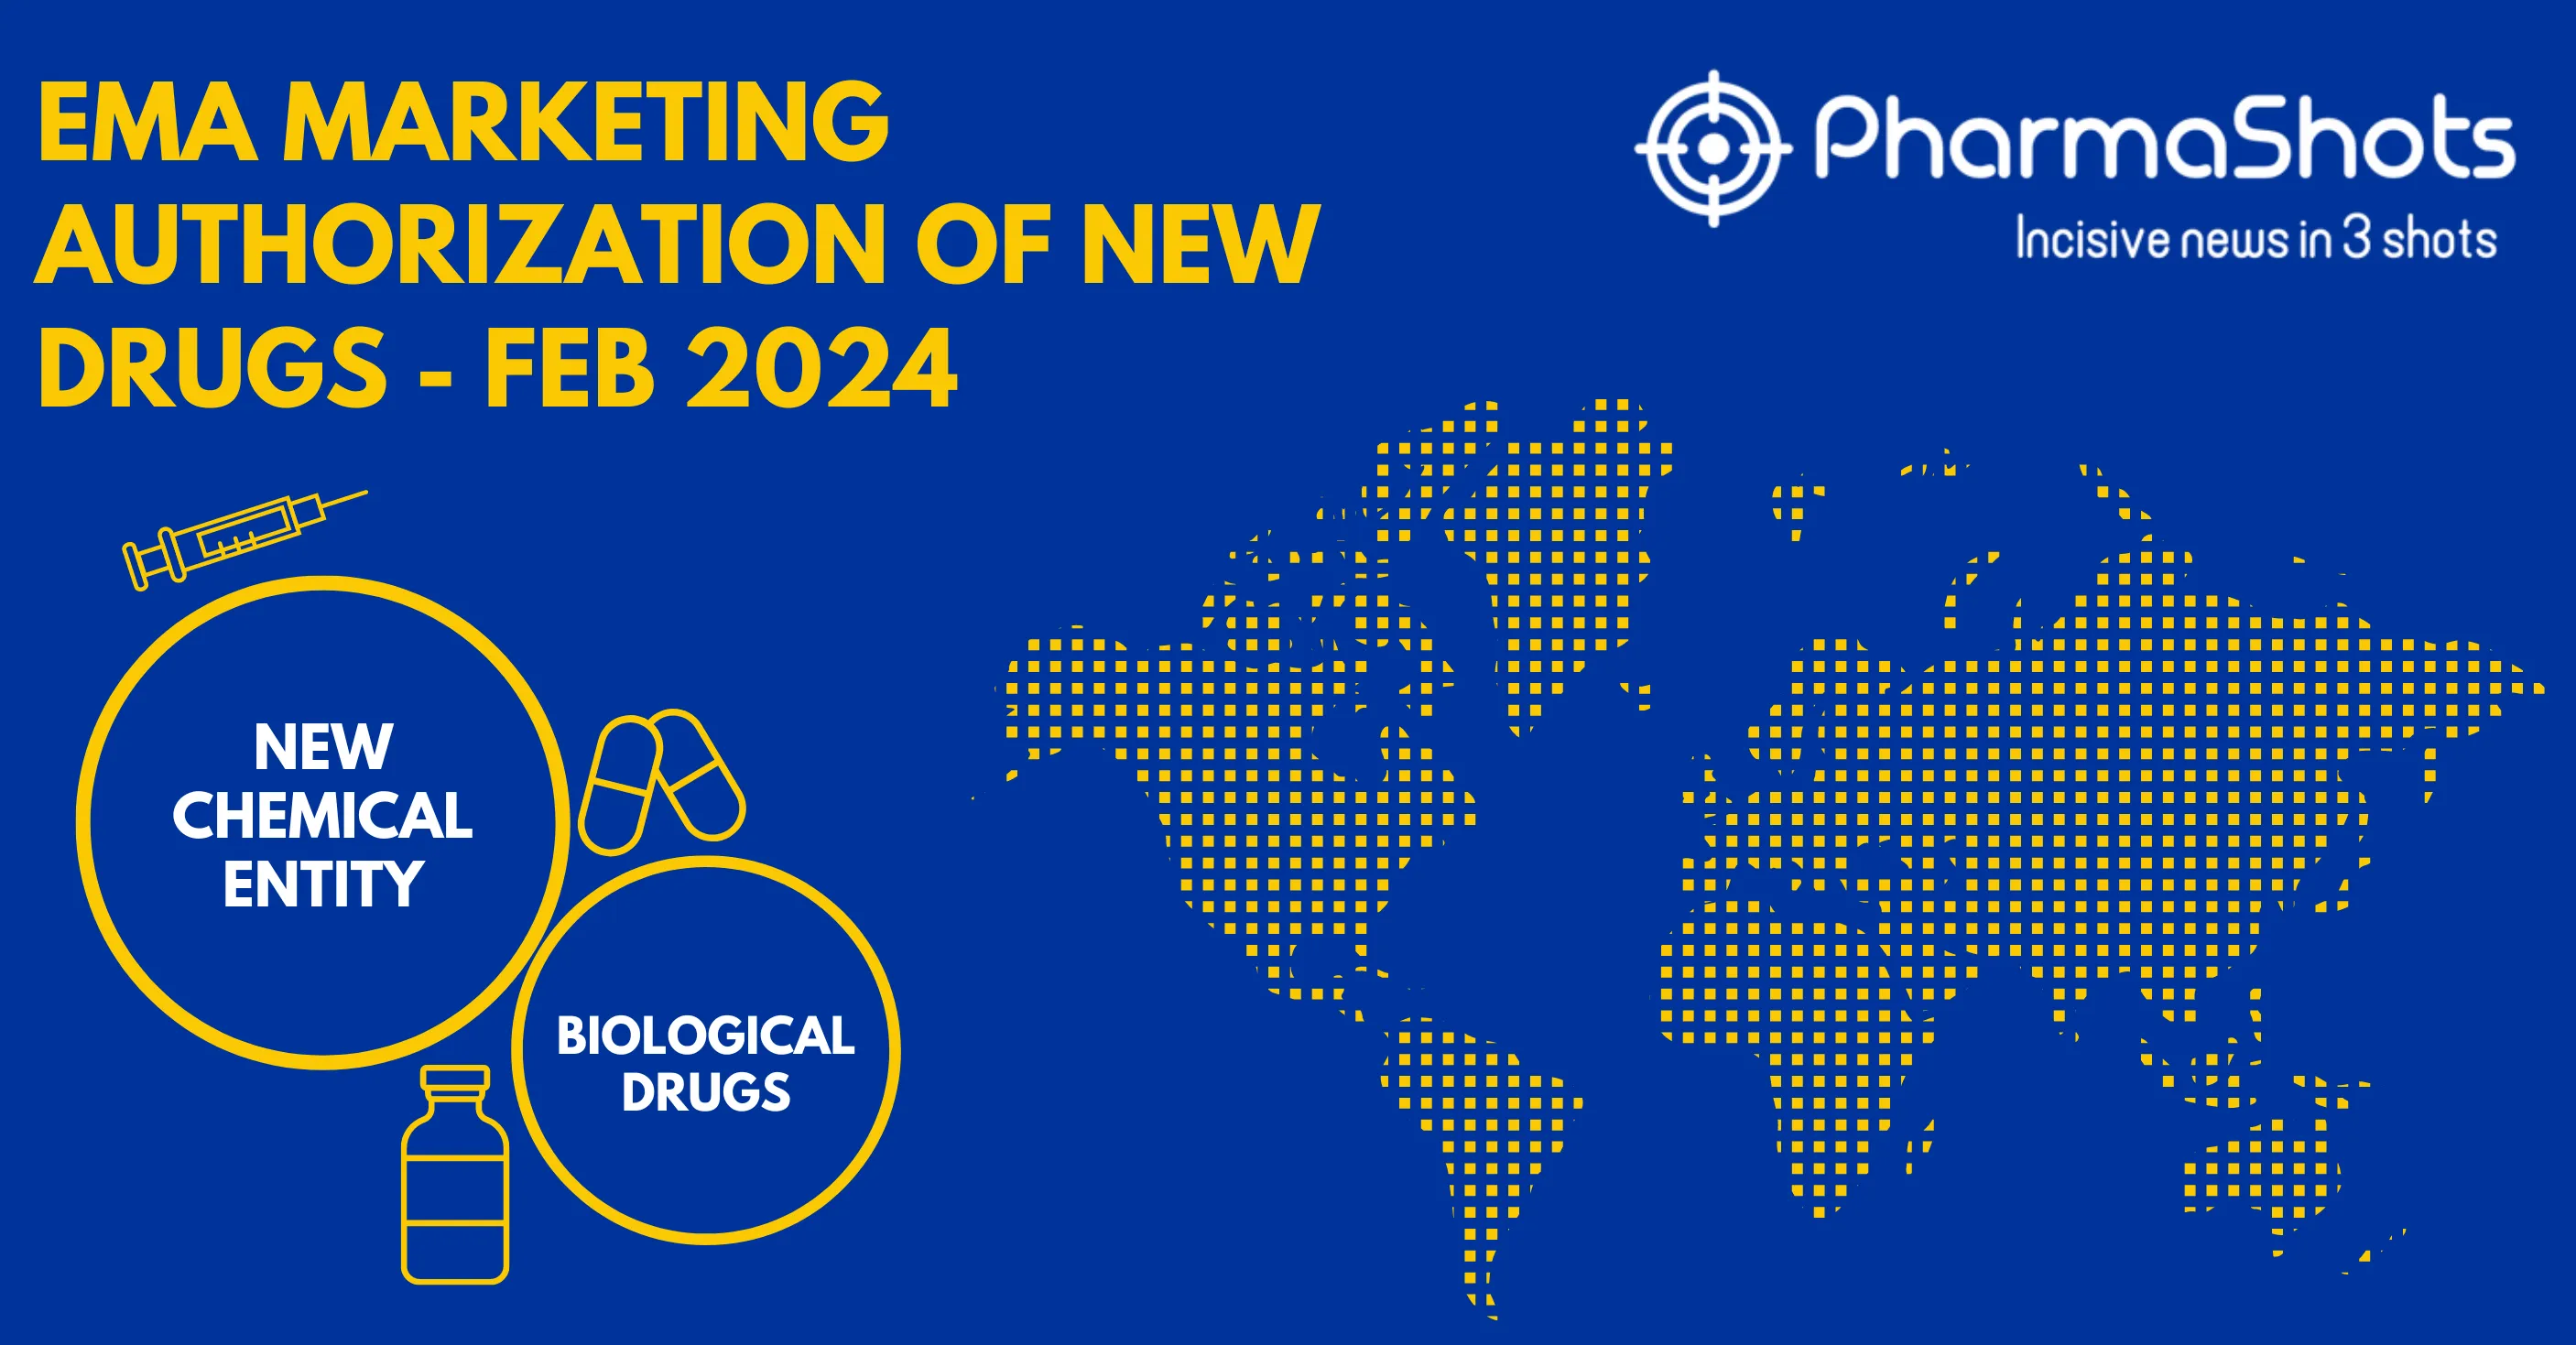 Insights+: EMA Marketing Authorization of New Drugs in February 2024